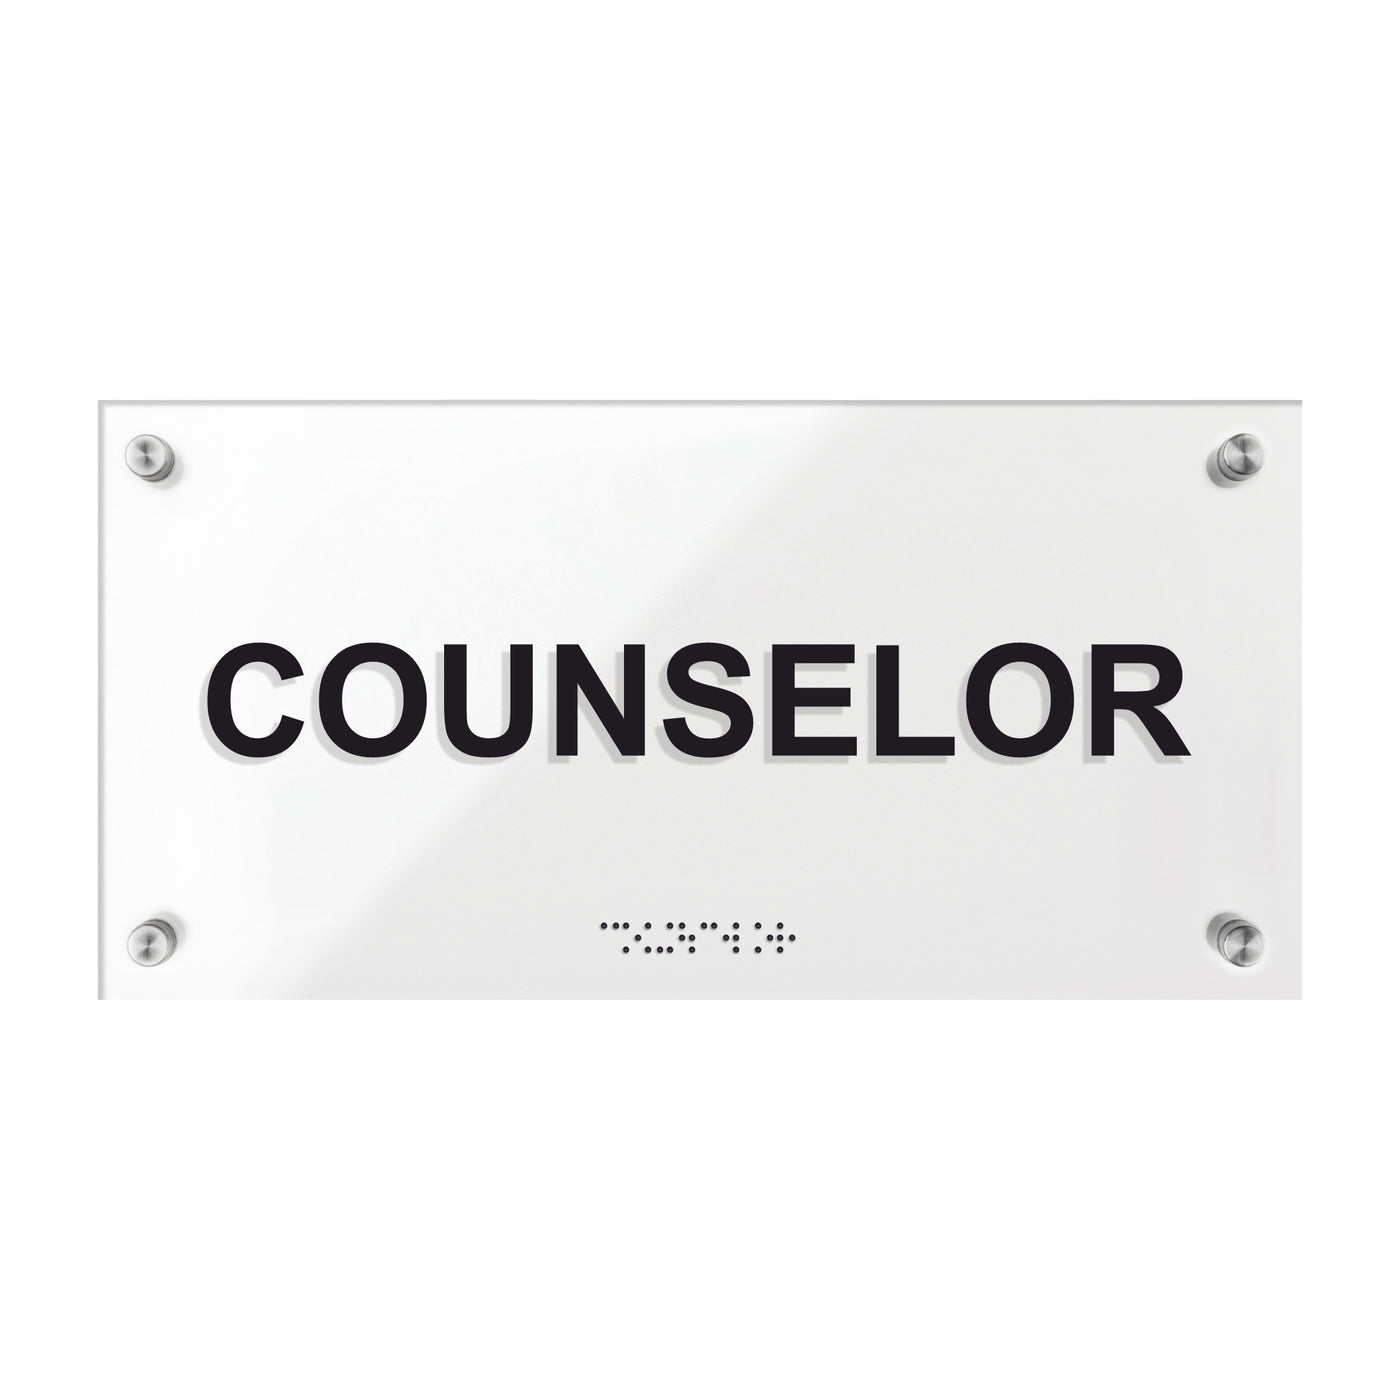 Counselor Sign - Acrylic Plate "Classic" Design